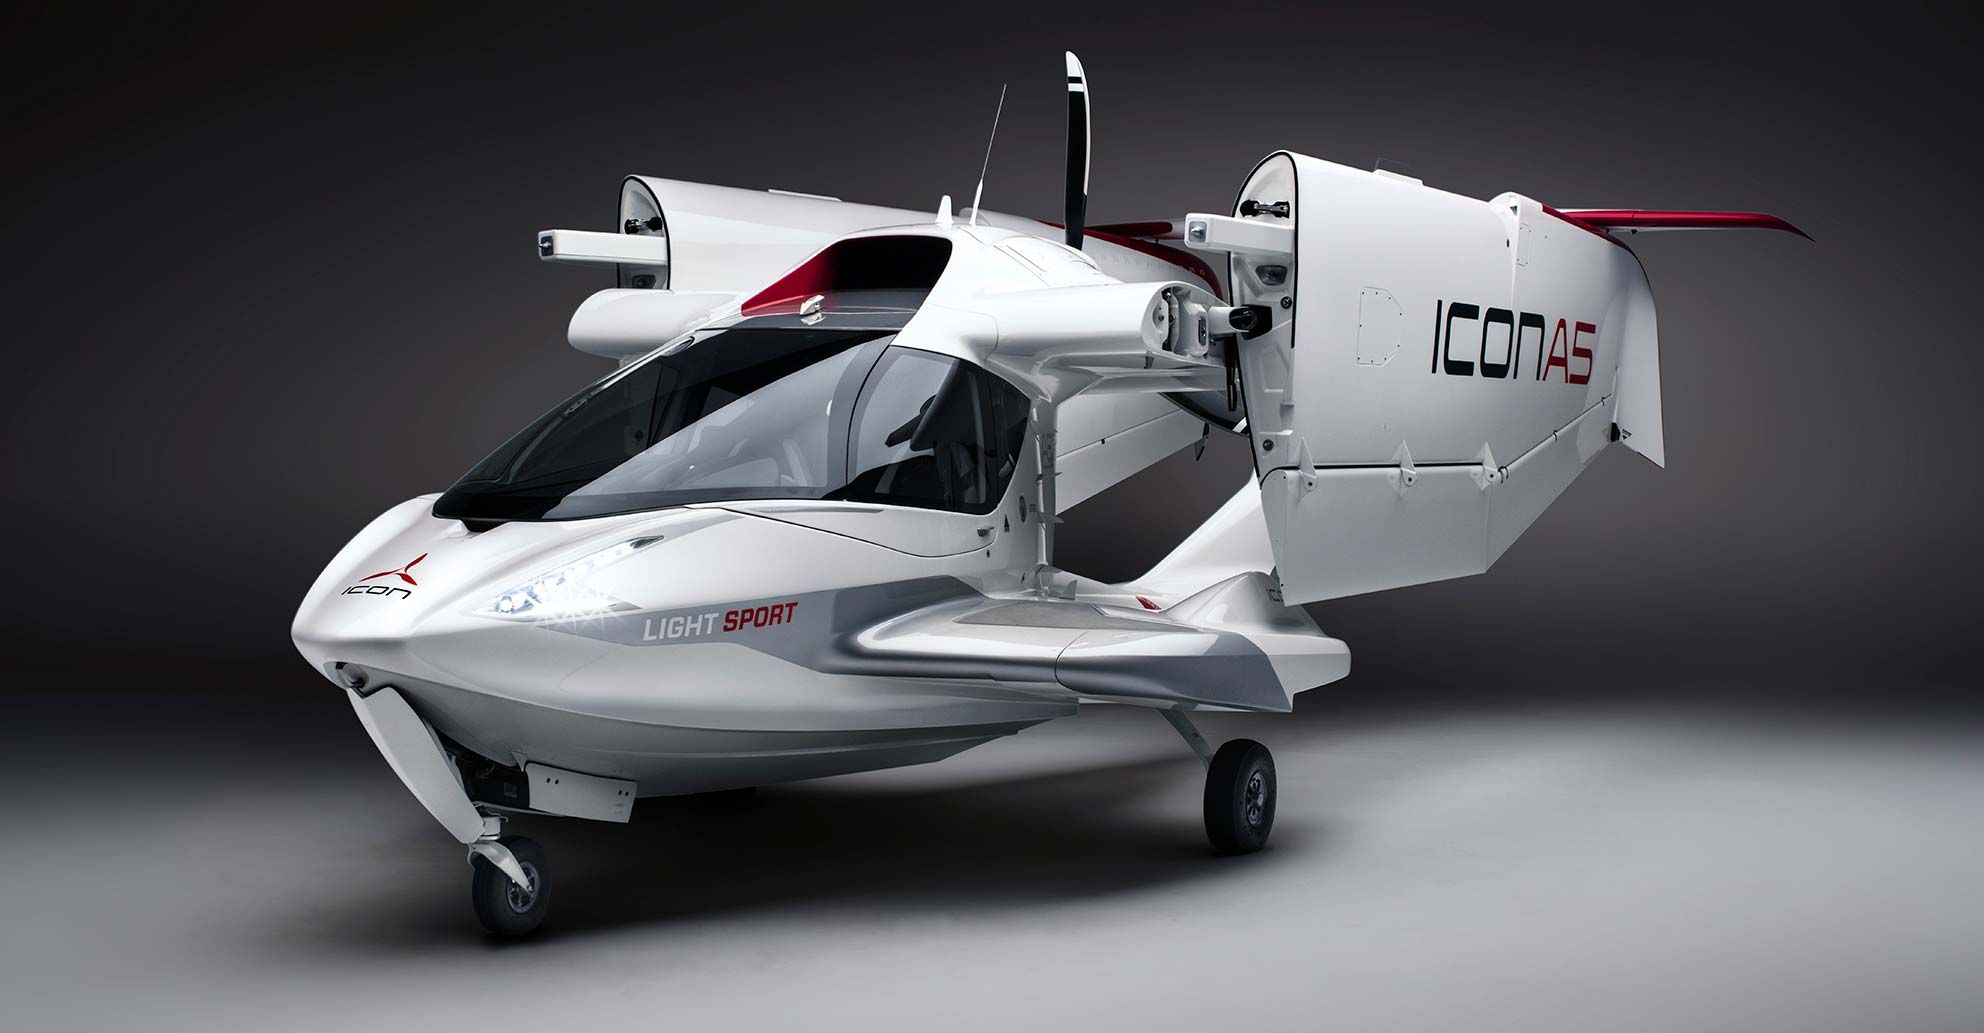 ICON-A5 Folding Wings